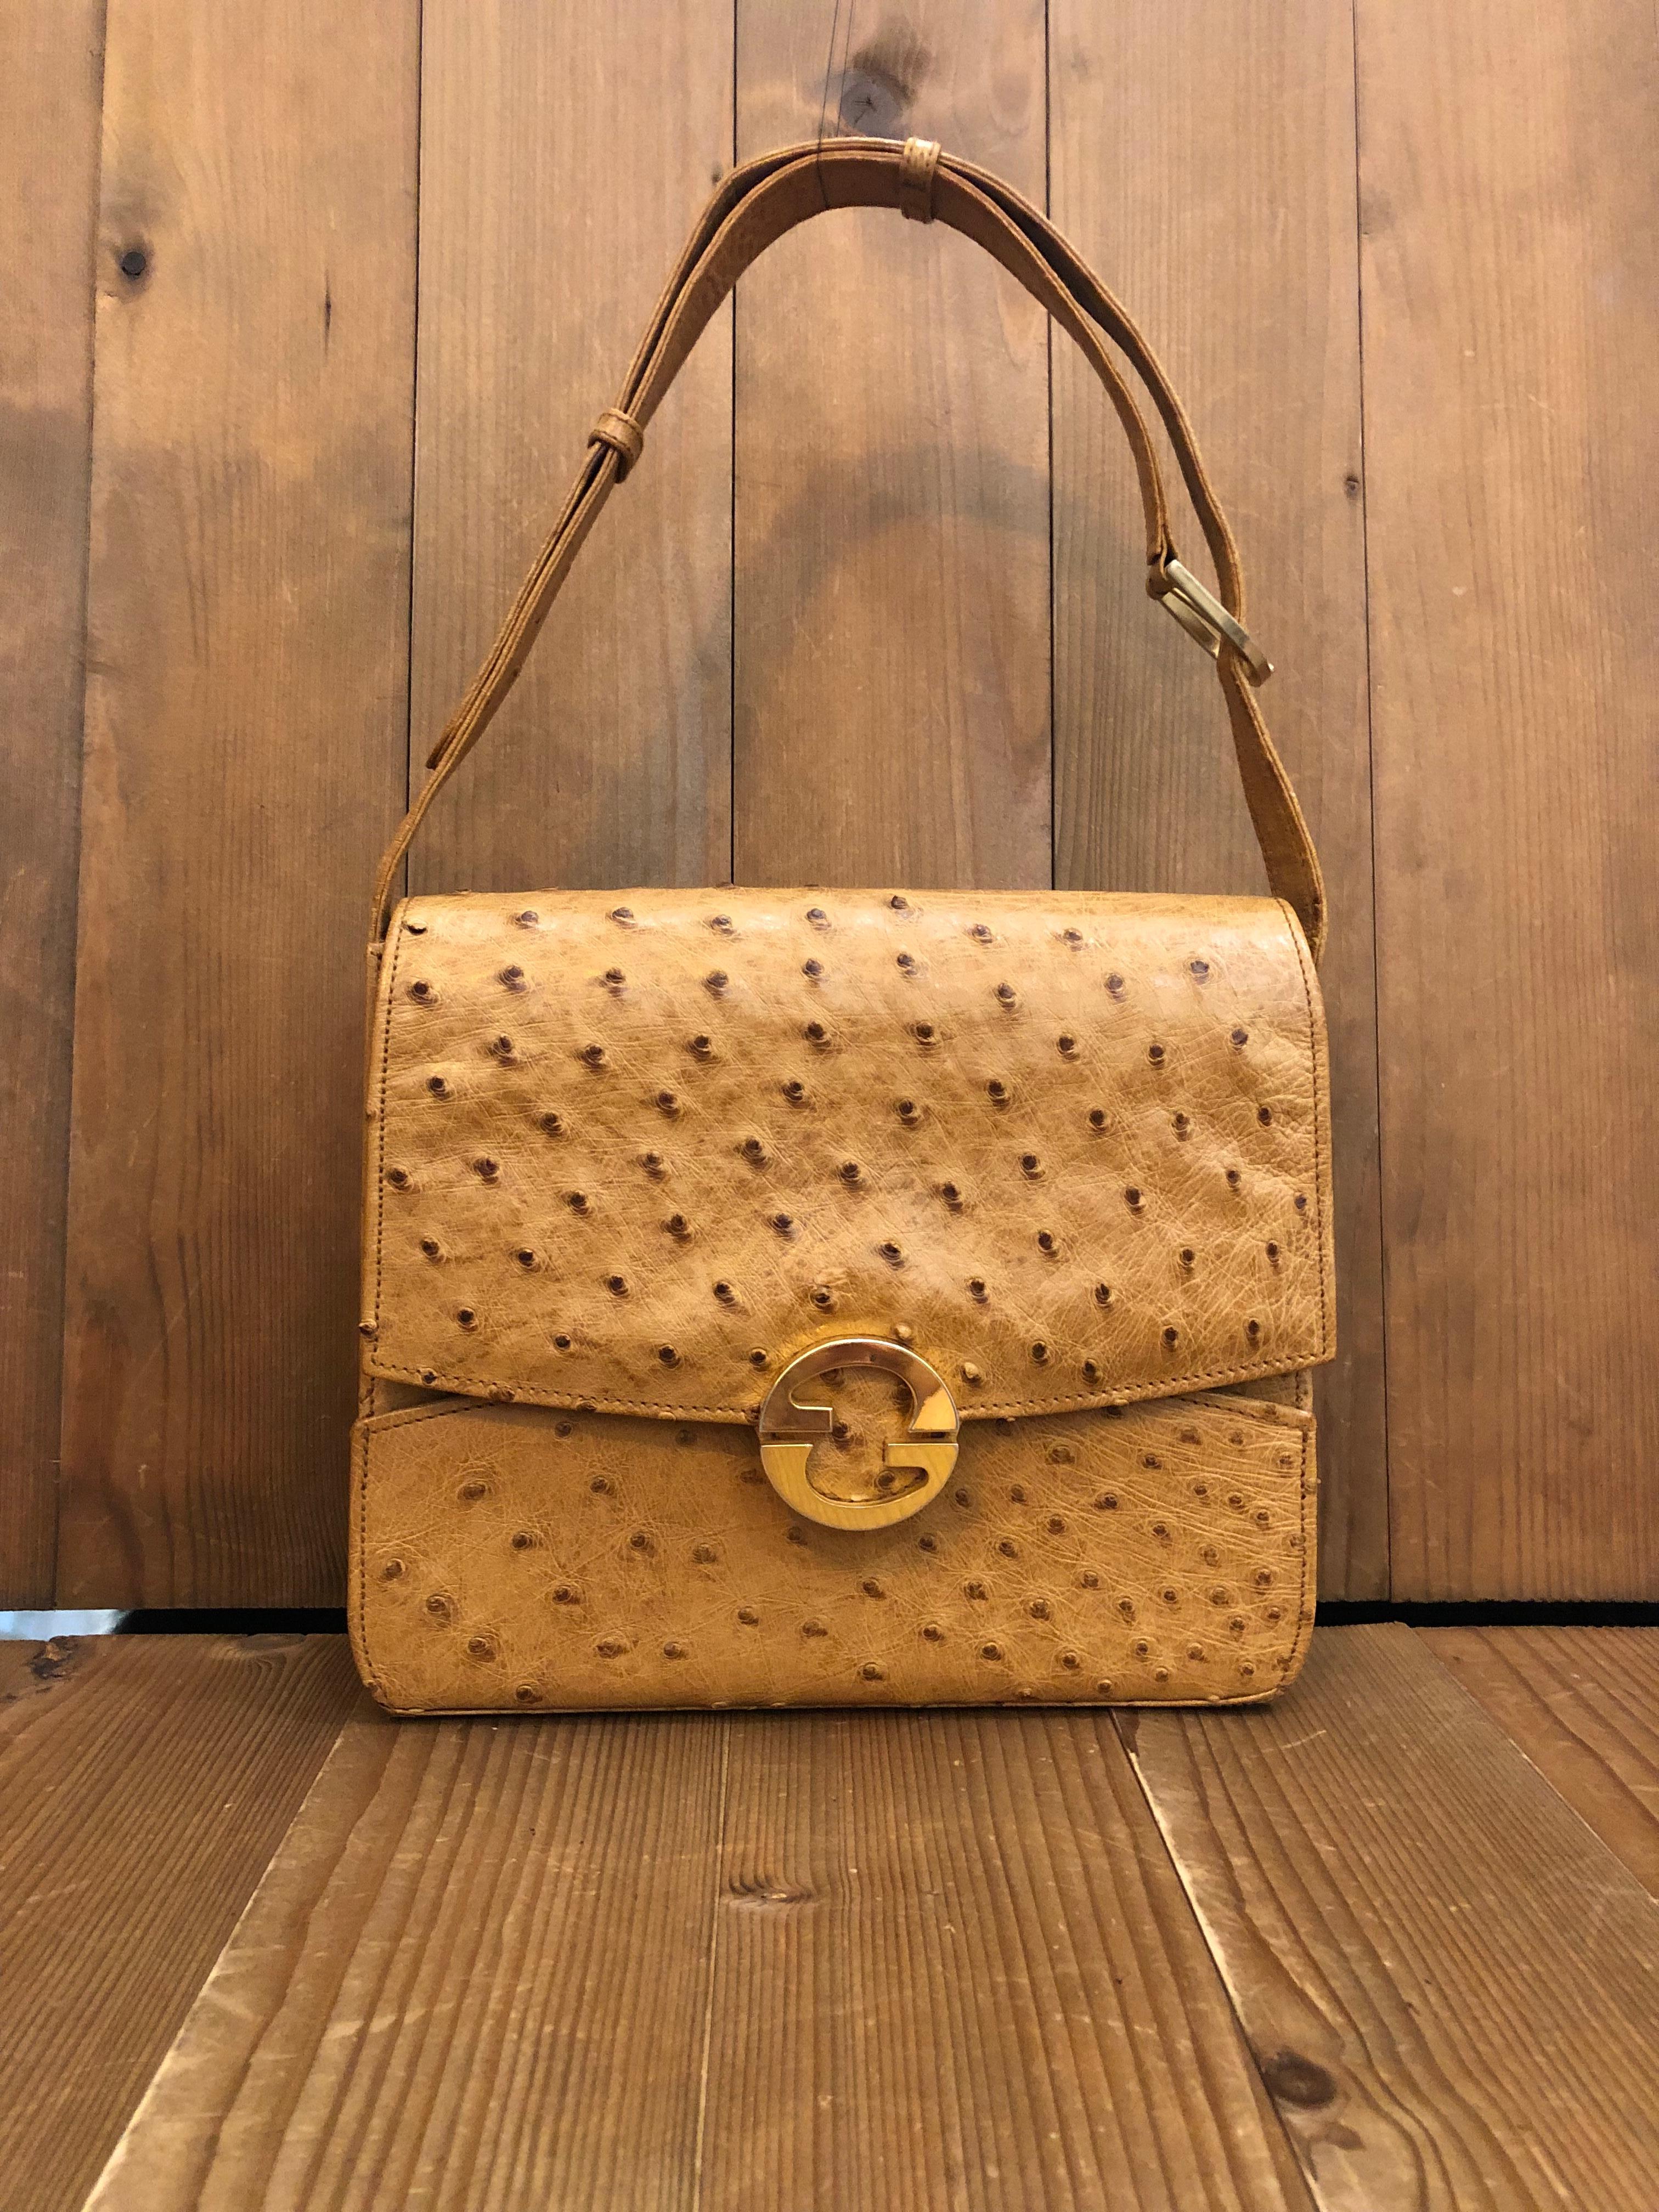 This rare vintage Gucci box shoulder bag is crafted of exotic leather in camel featuring gold toned hardware and brown lambskin leather interior. Front flap spring GG closure opens to three compartments including one middle compartment with flap